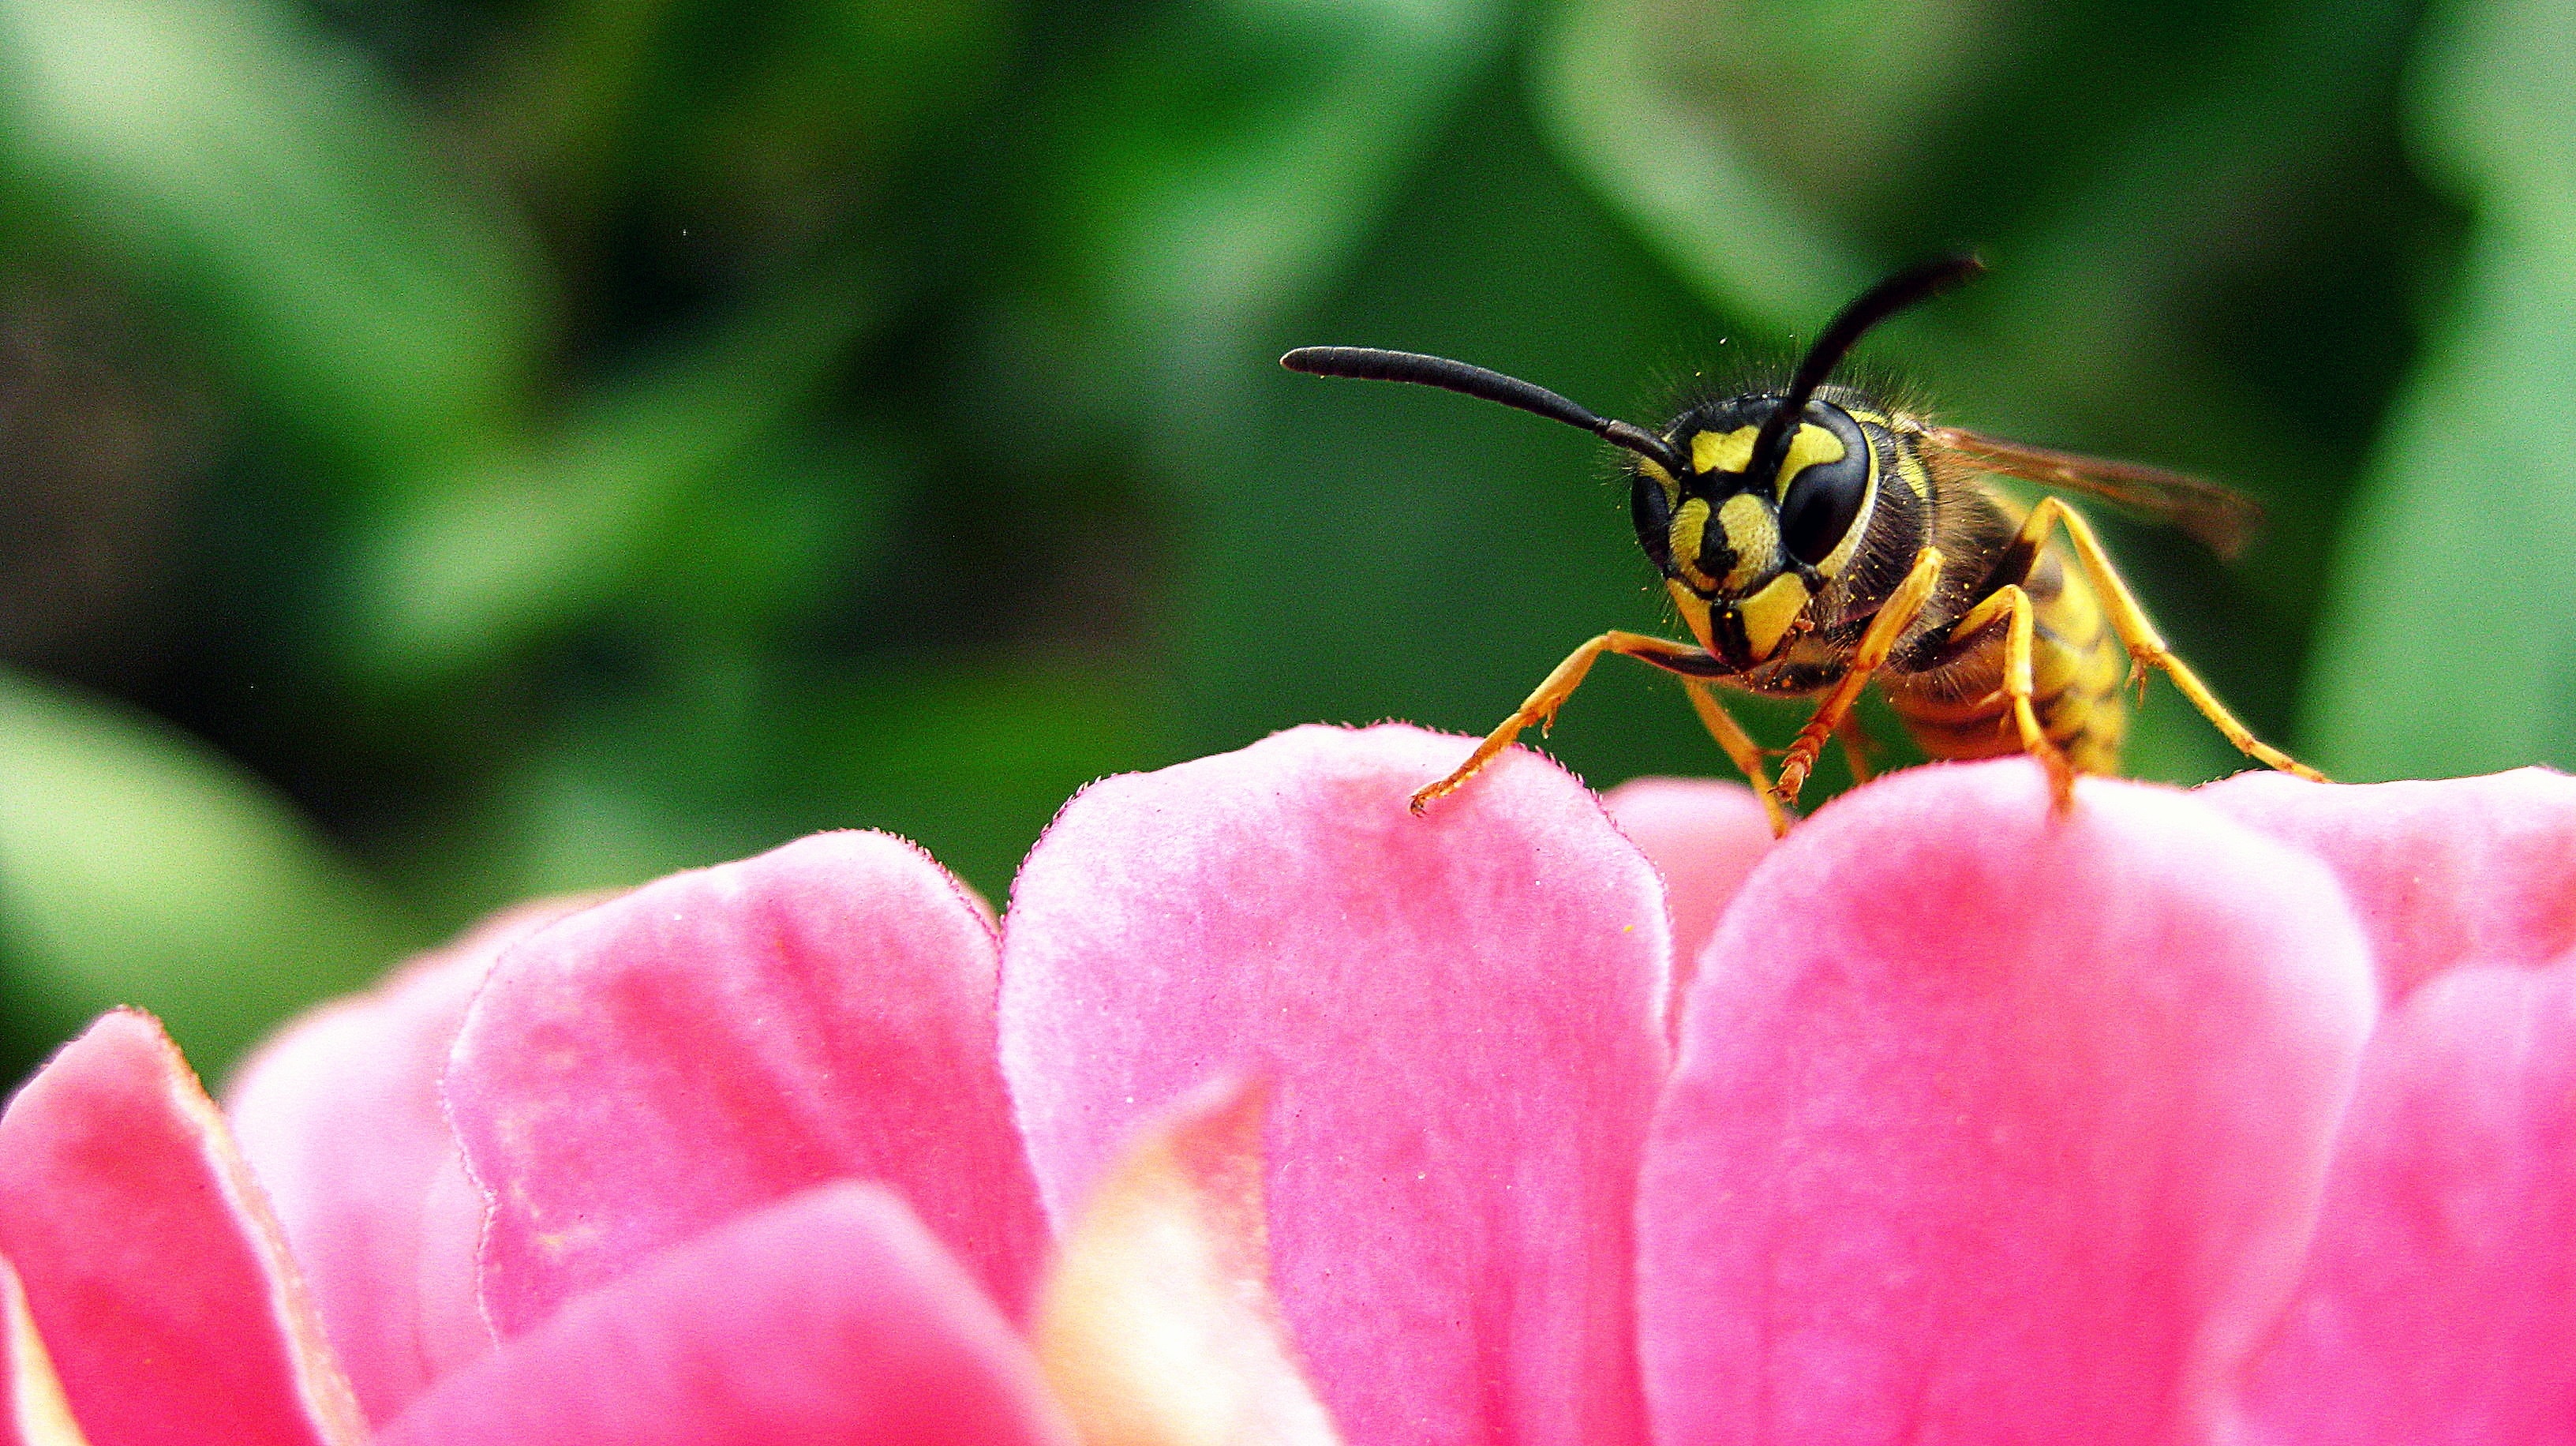 yellow jacket wasp perched on pink petaled flower